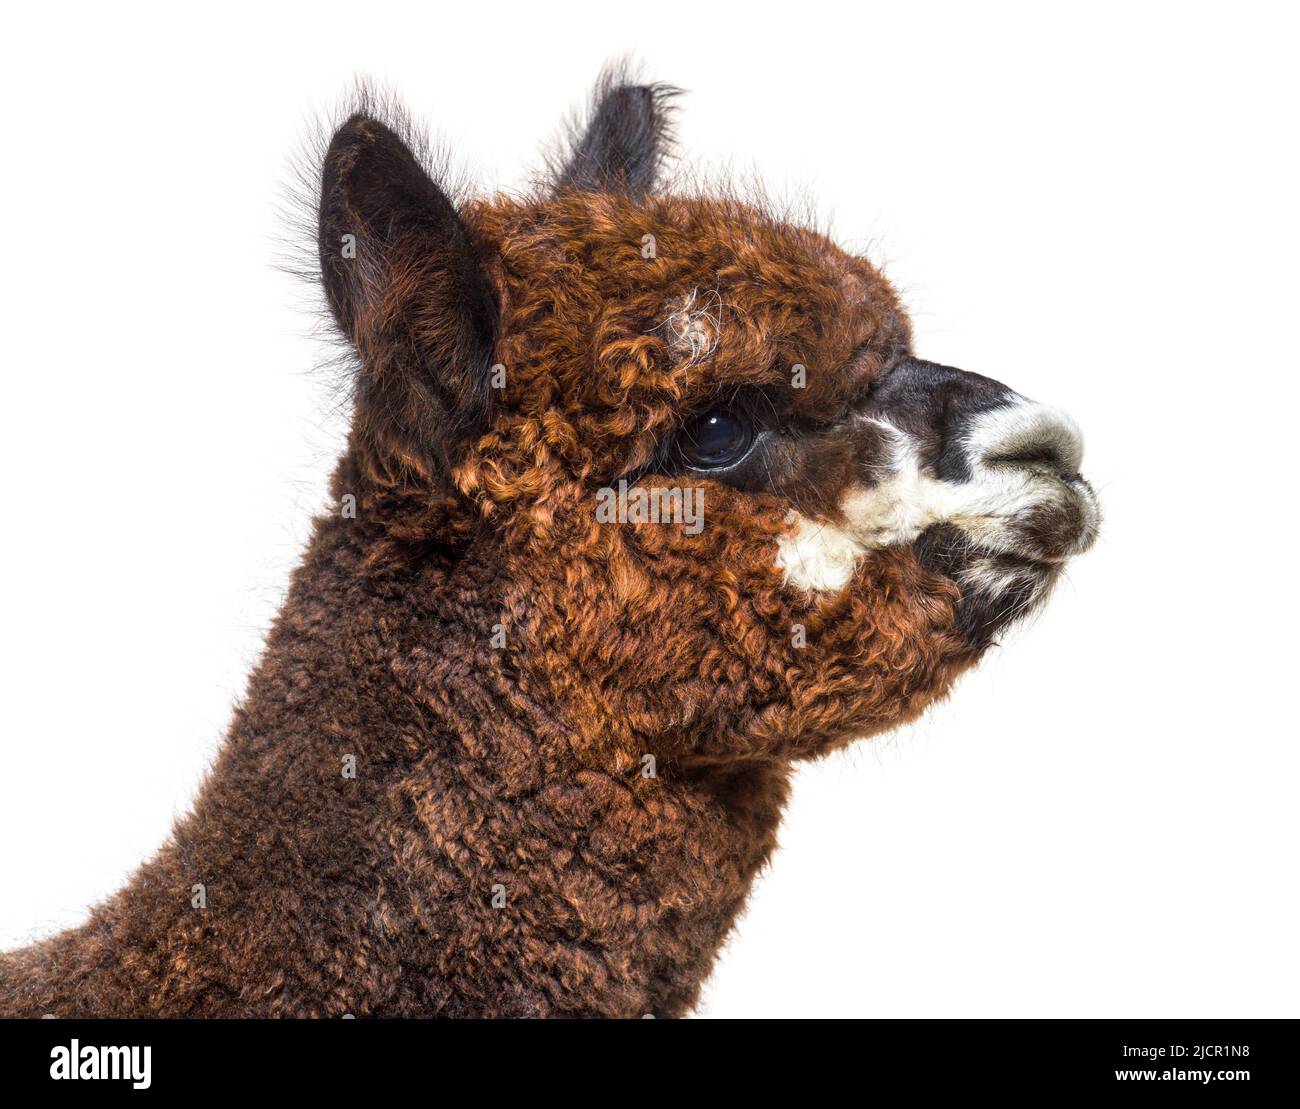 Rose grey young alpaca eight months old - Lama pacos, isoltaed on white Stock Photo